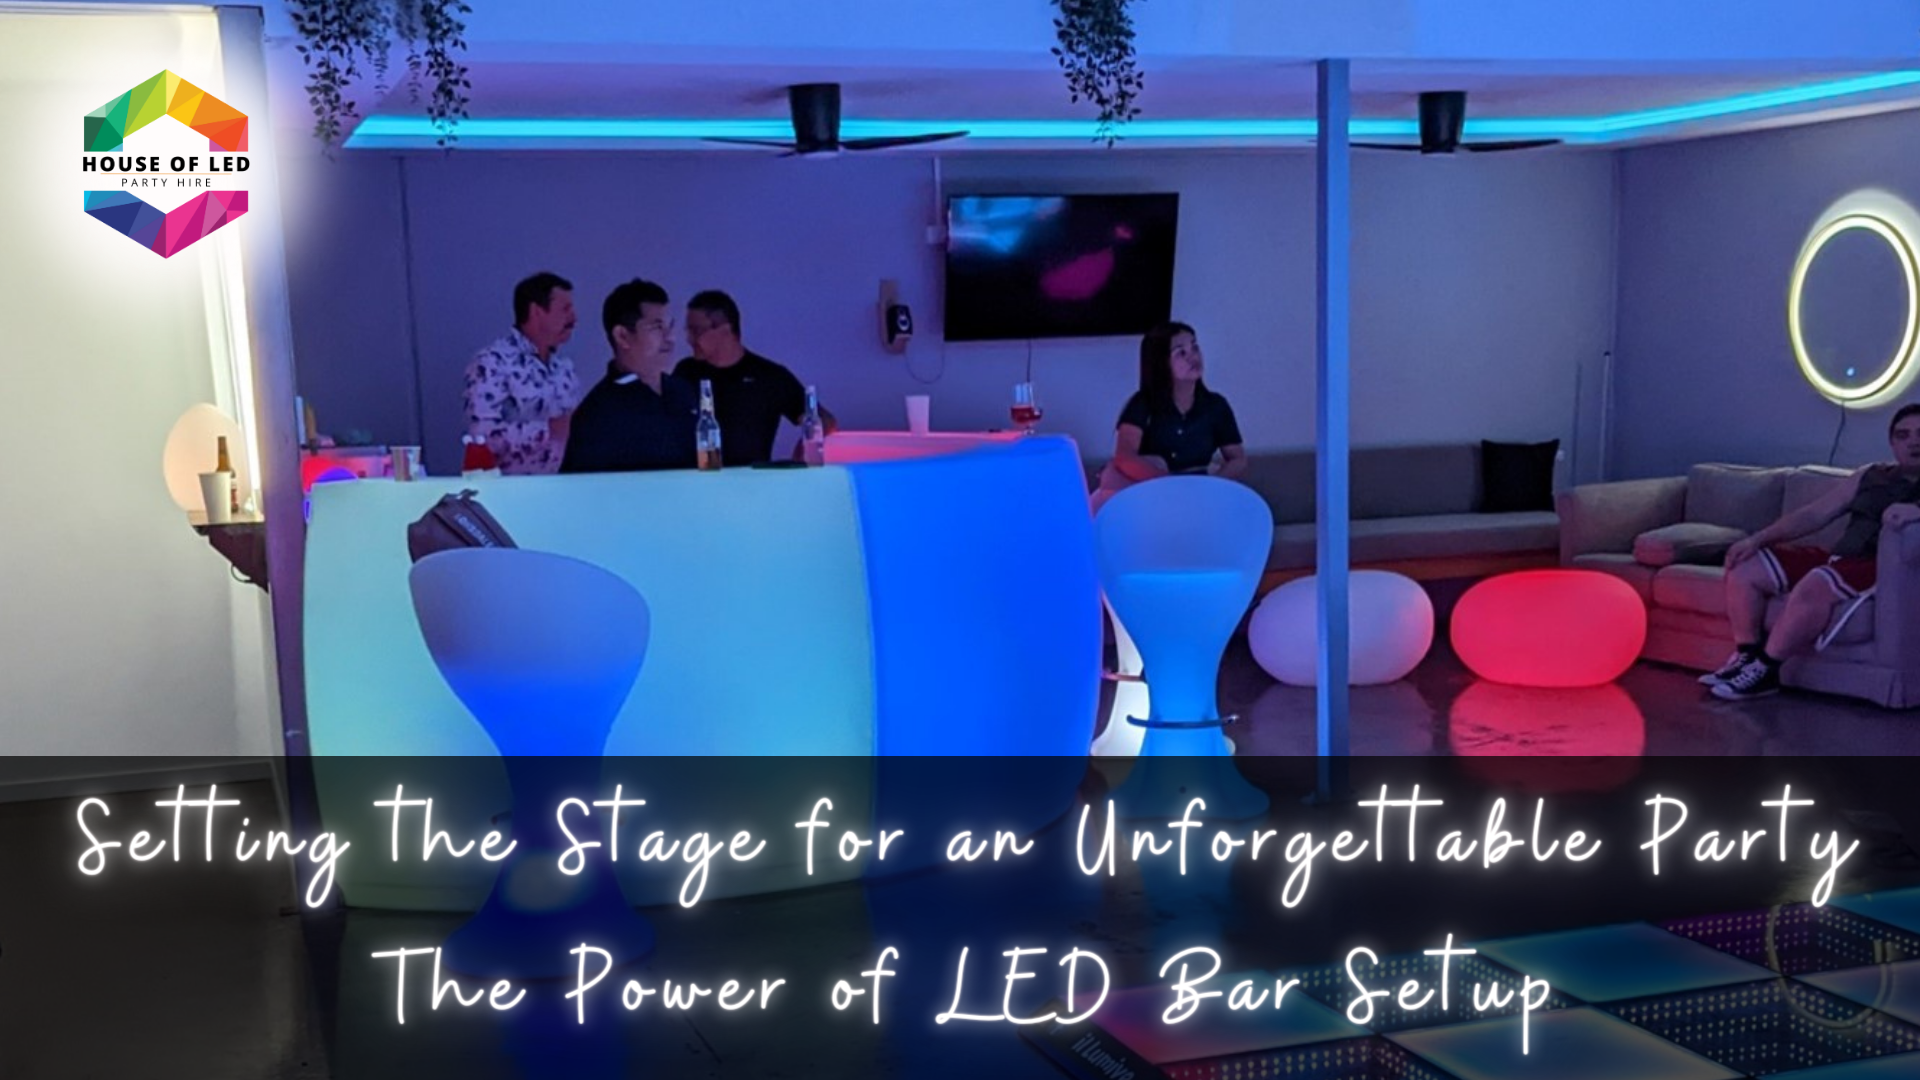 LED Furniture party hire in Brisbane